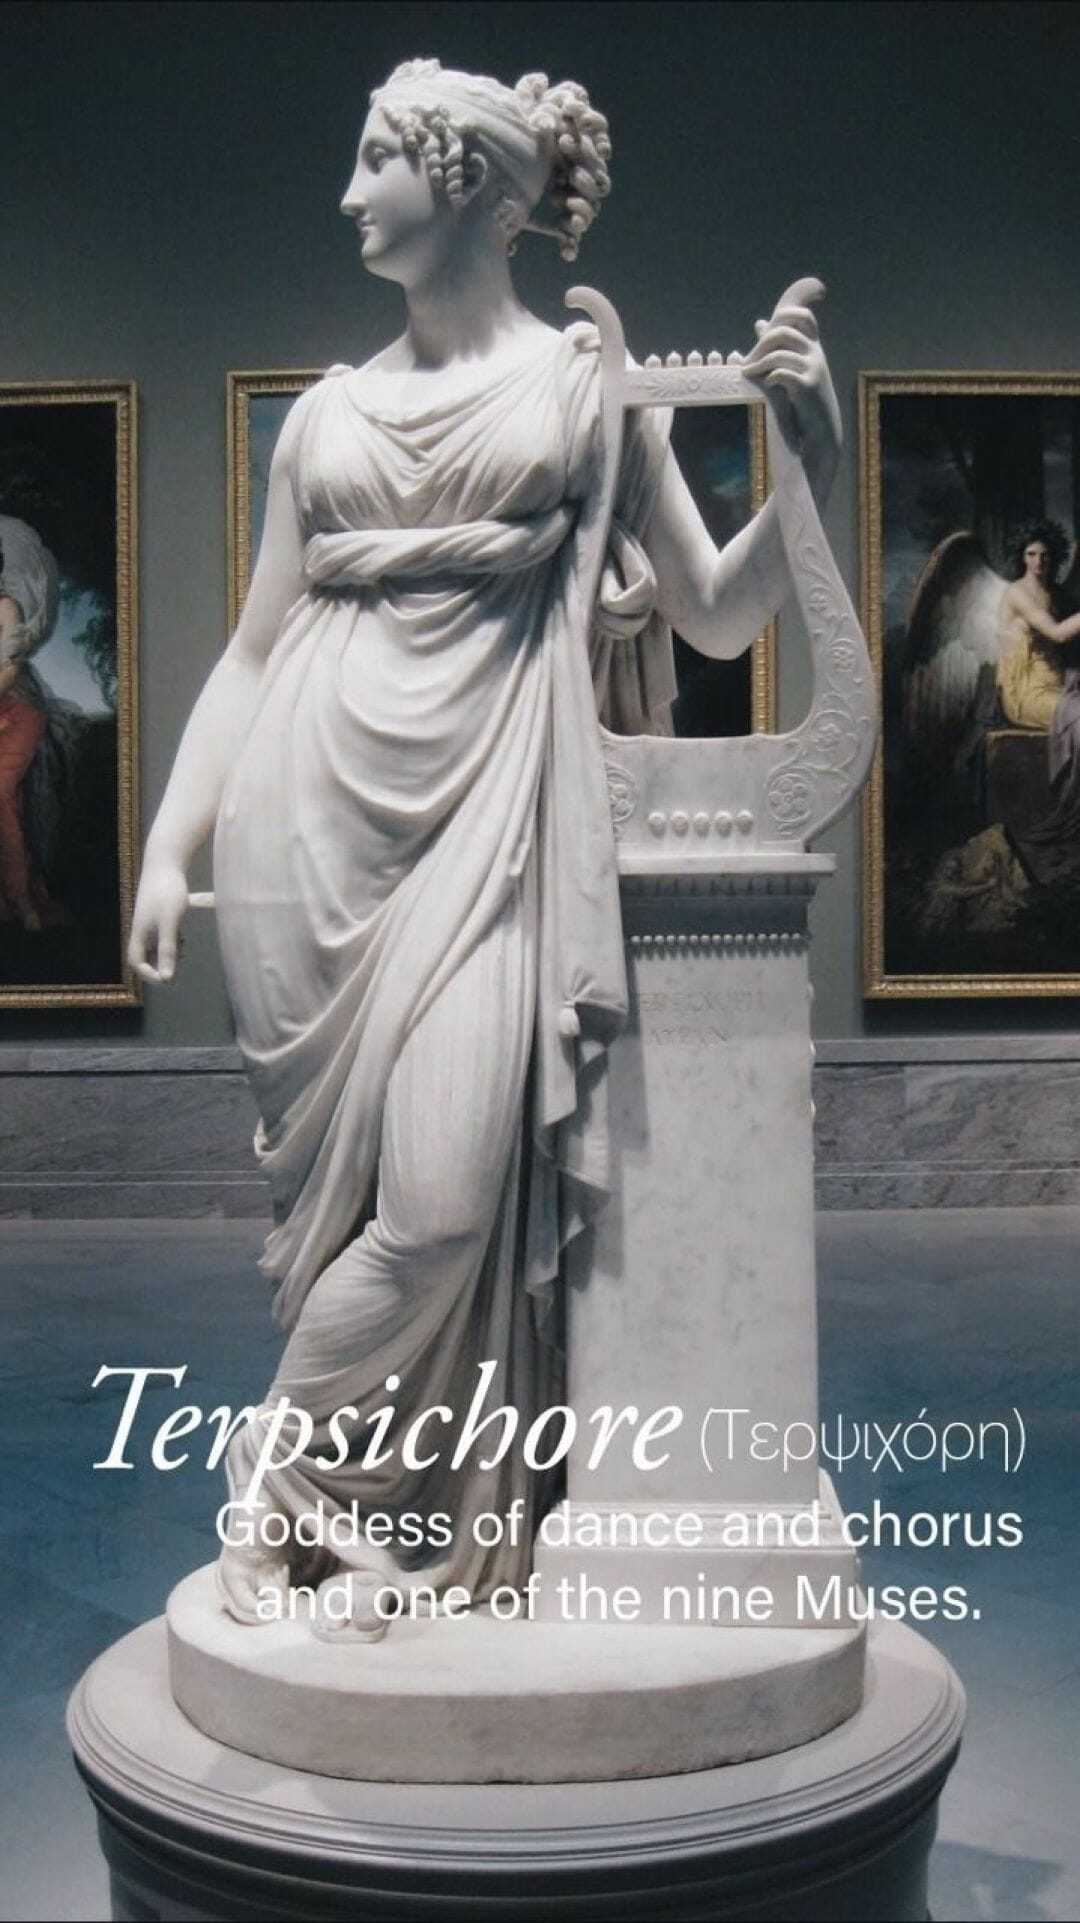 Terpsichore, goddess of dance and chorus and one of the nine Muses. - Greek statue, Greek mythology